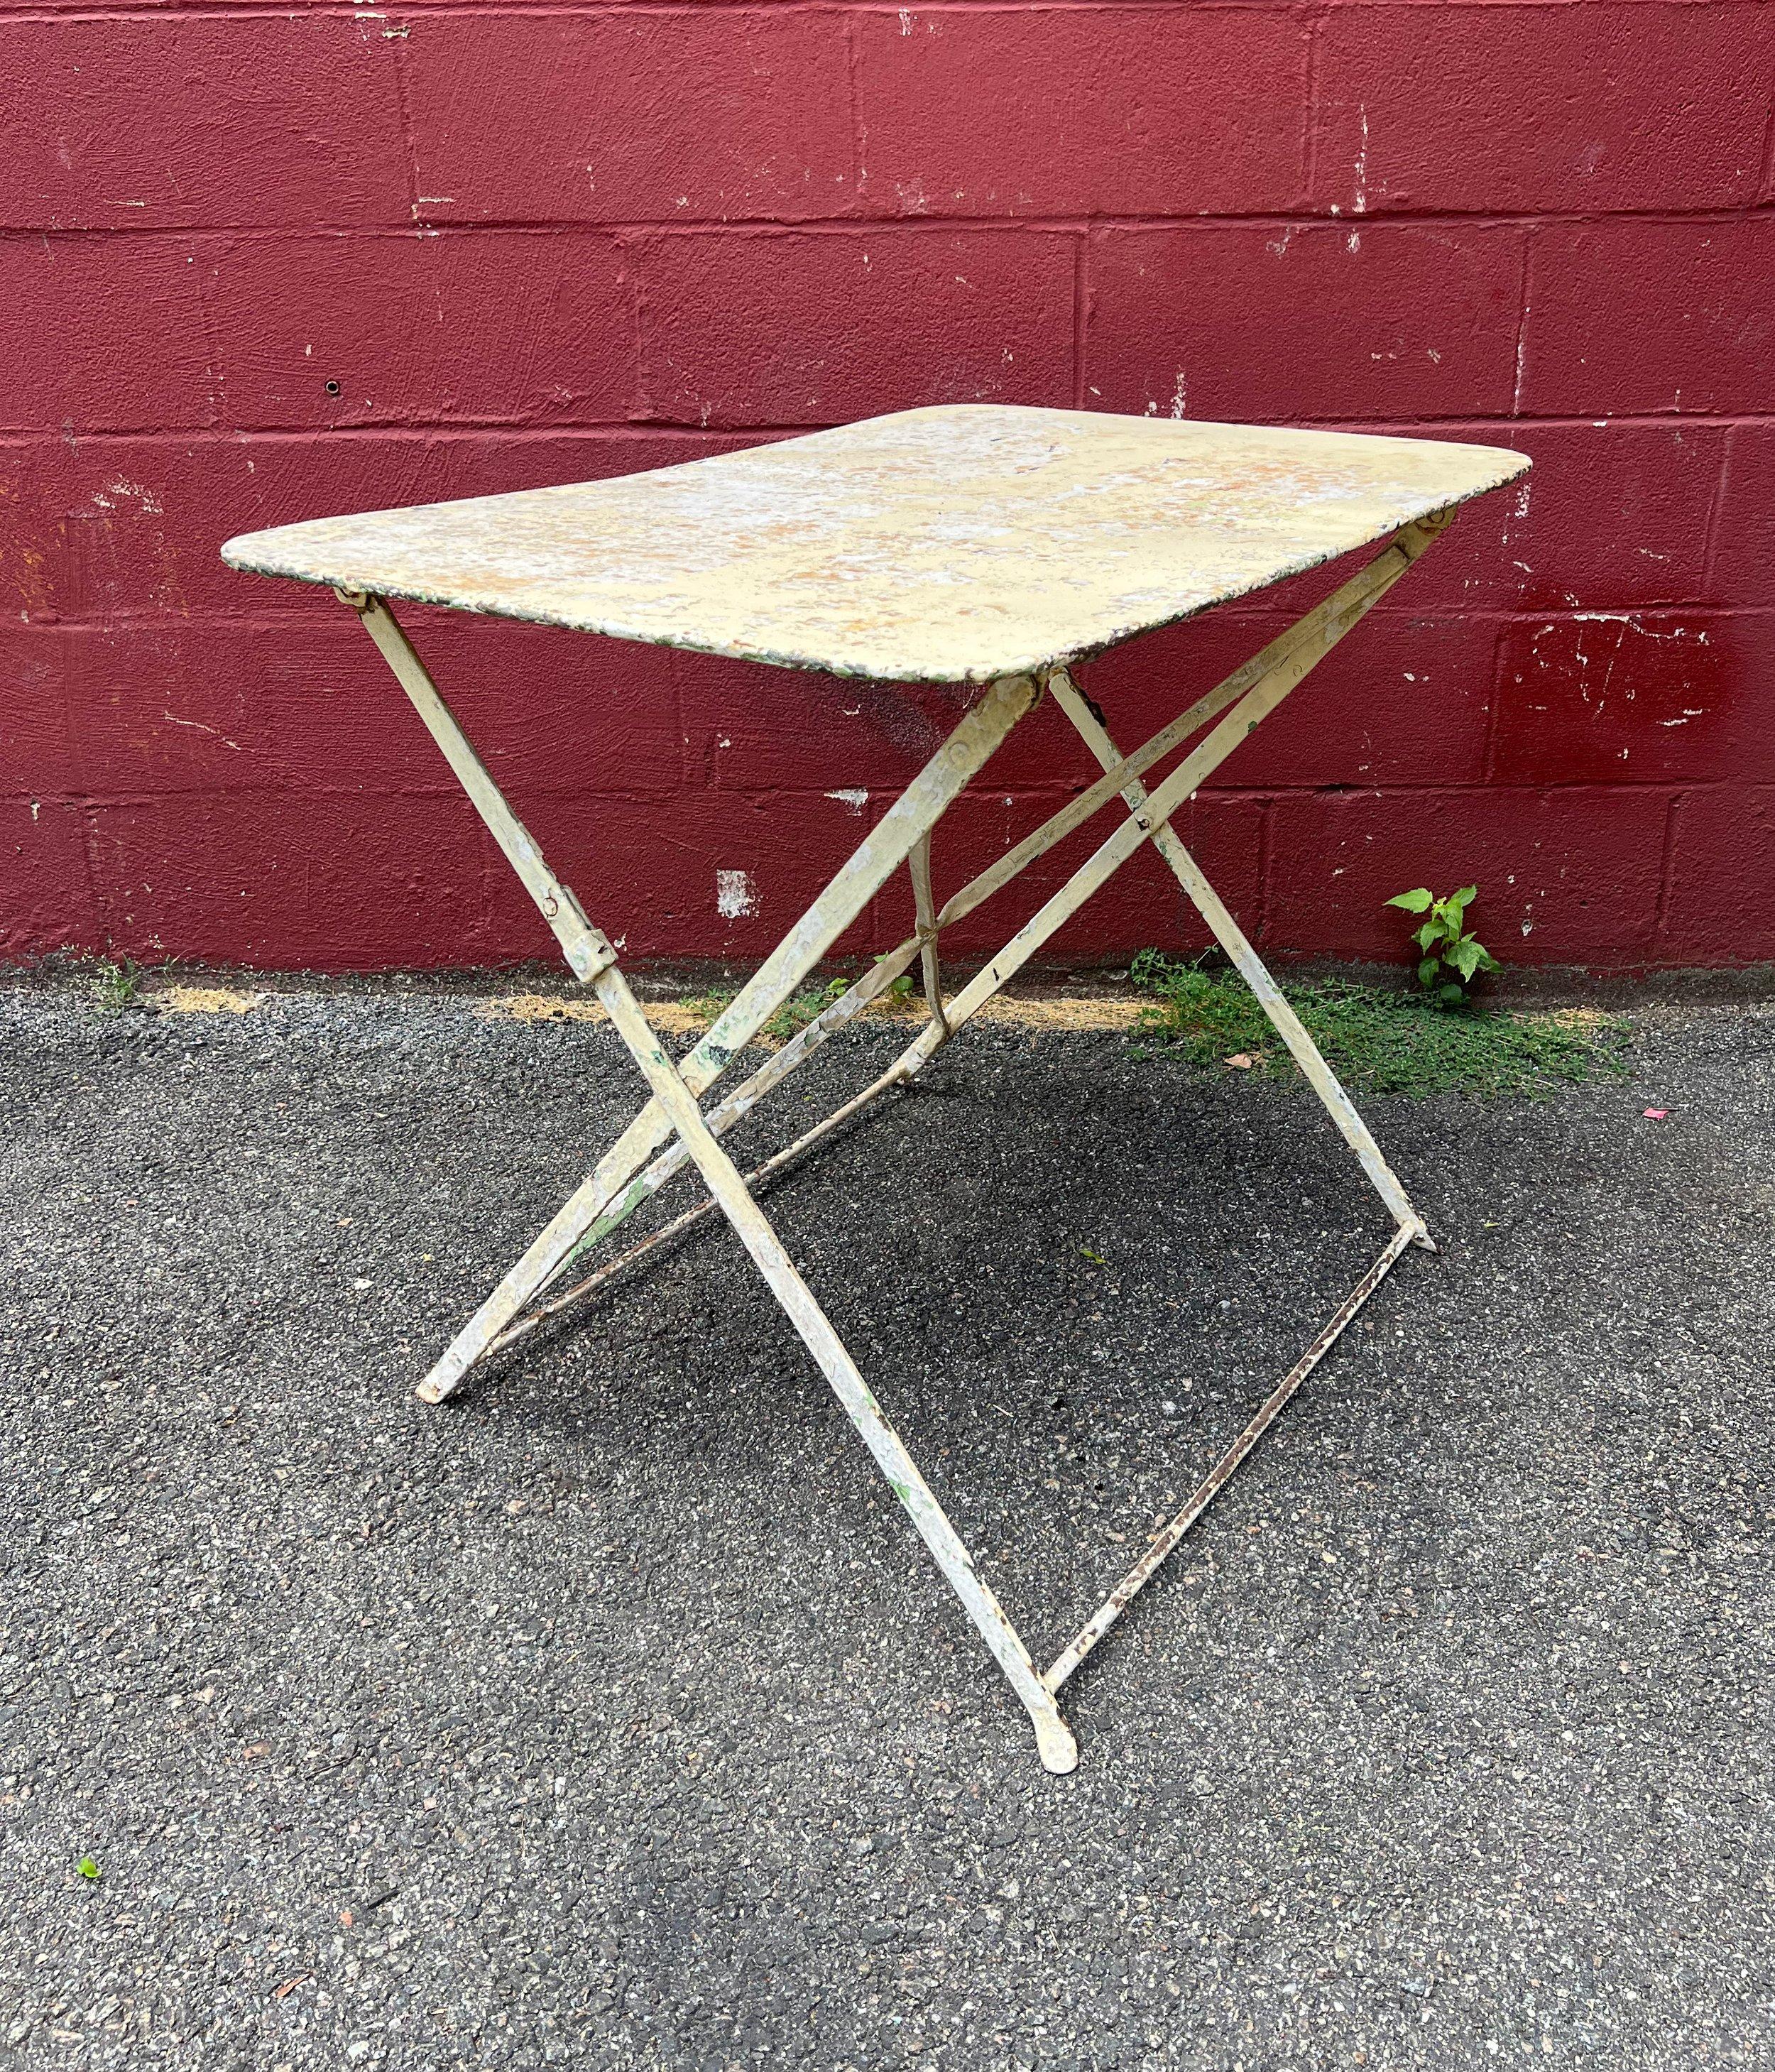 This charming French bistro or garden table in its original distressed white paint is a classic piece that embodies the charm and sophistication of French style. Made of iron and metal, this rectangular table is structurally sound and designed for